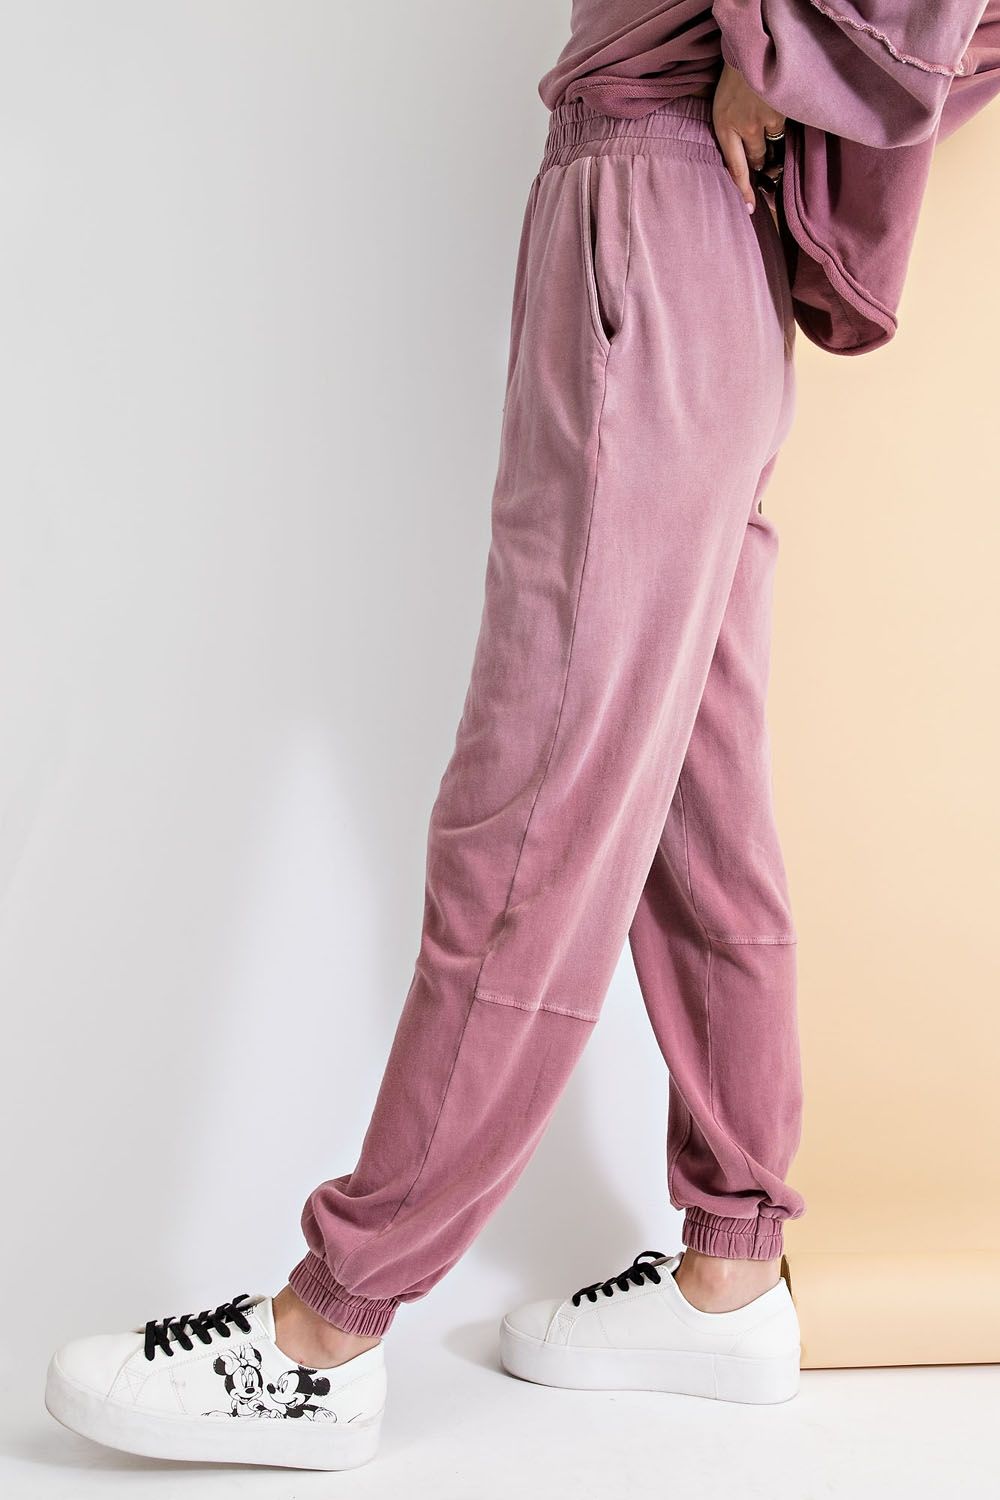 Buy Easel Ombre Terry Deep Dye Drawstring Loosefit Jogger Pants by Sensual Fashion Boutique by Sensual Fashion Boutique